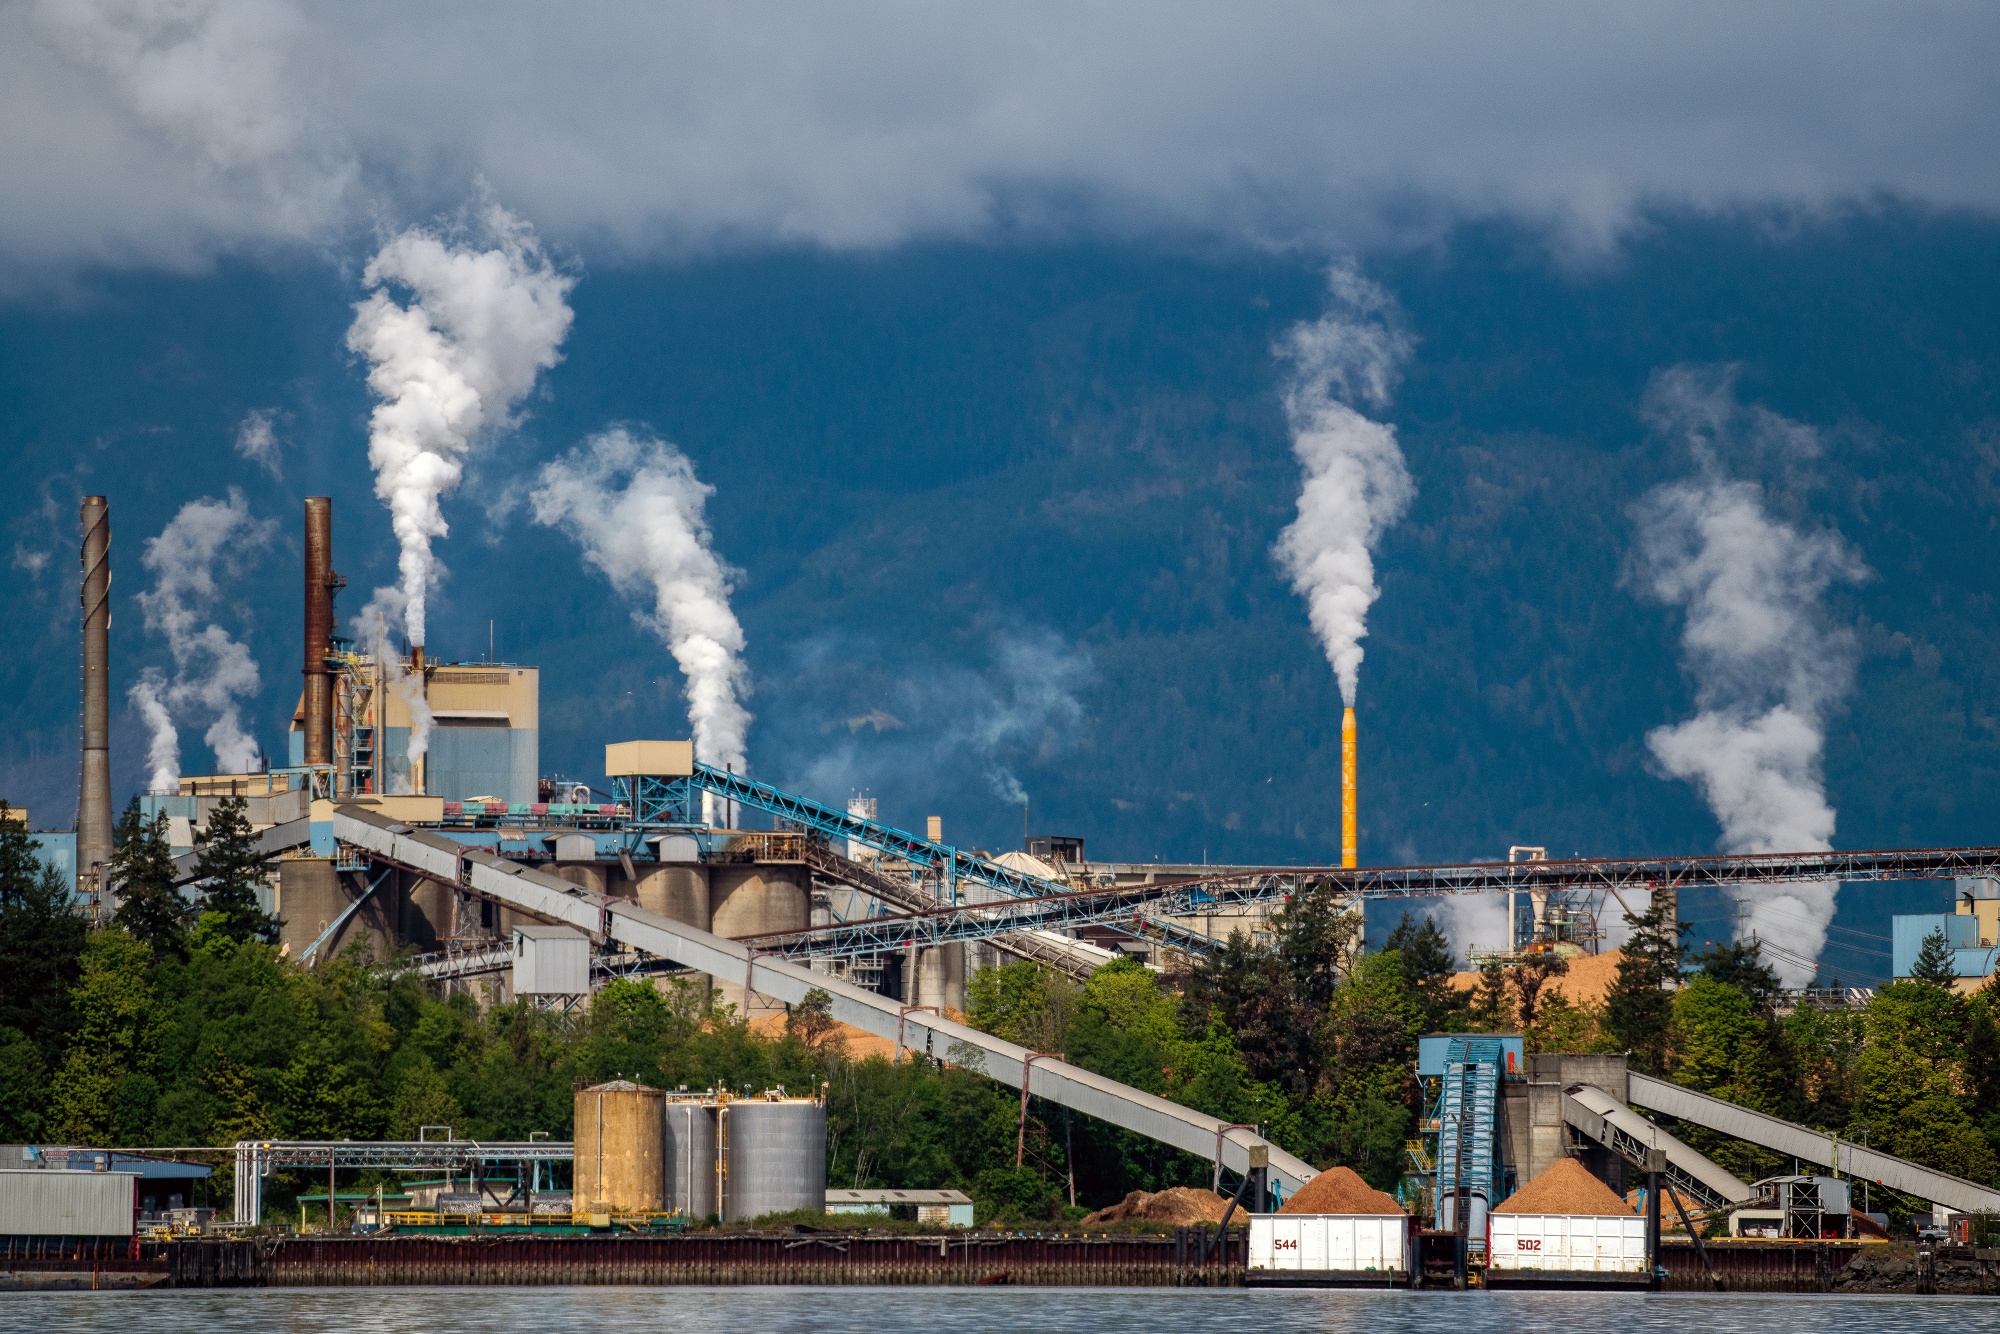 A pulp and paper mill in Crofton, British Columbia.